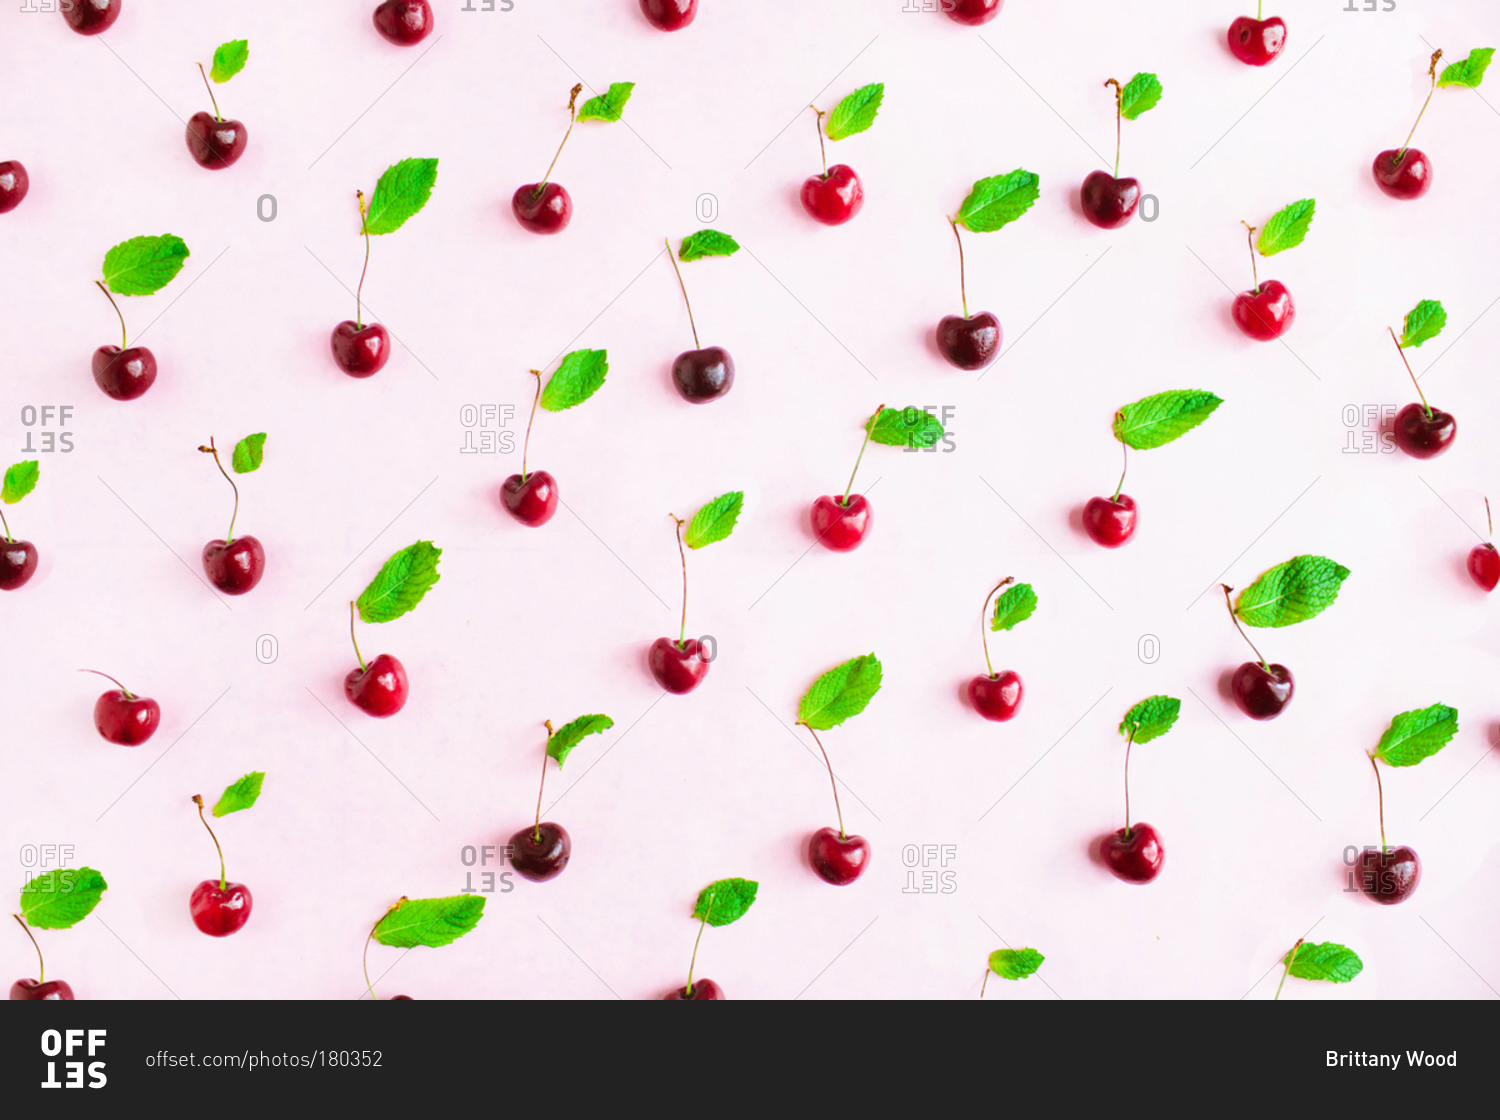 Cherries with stems laid out in pattern